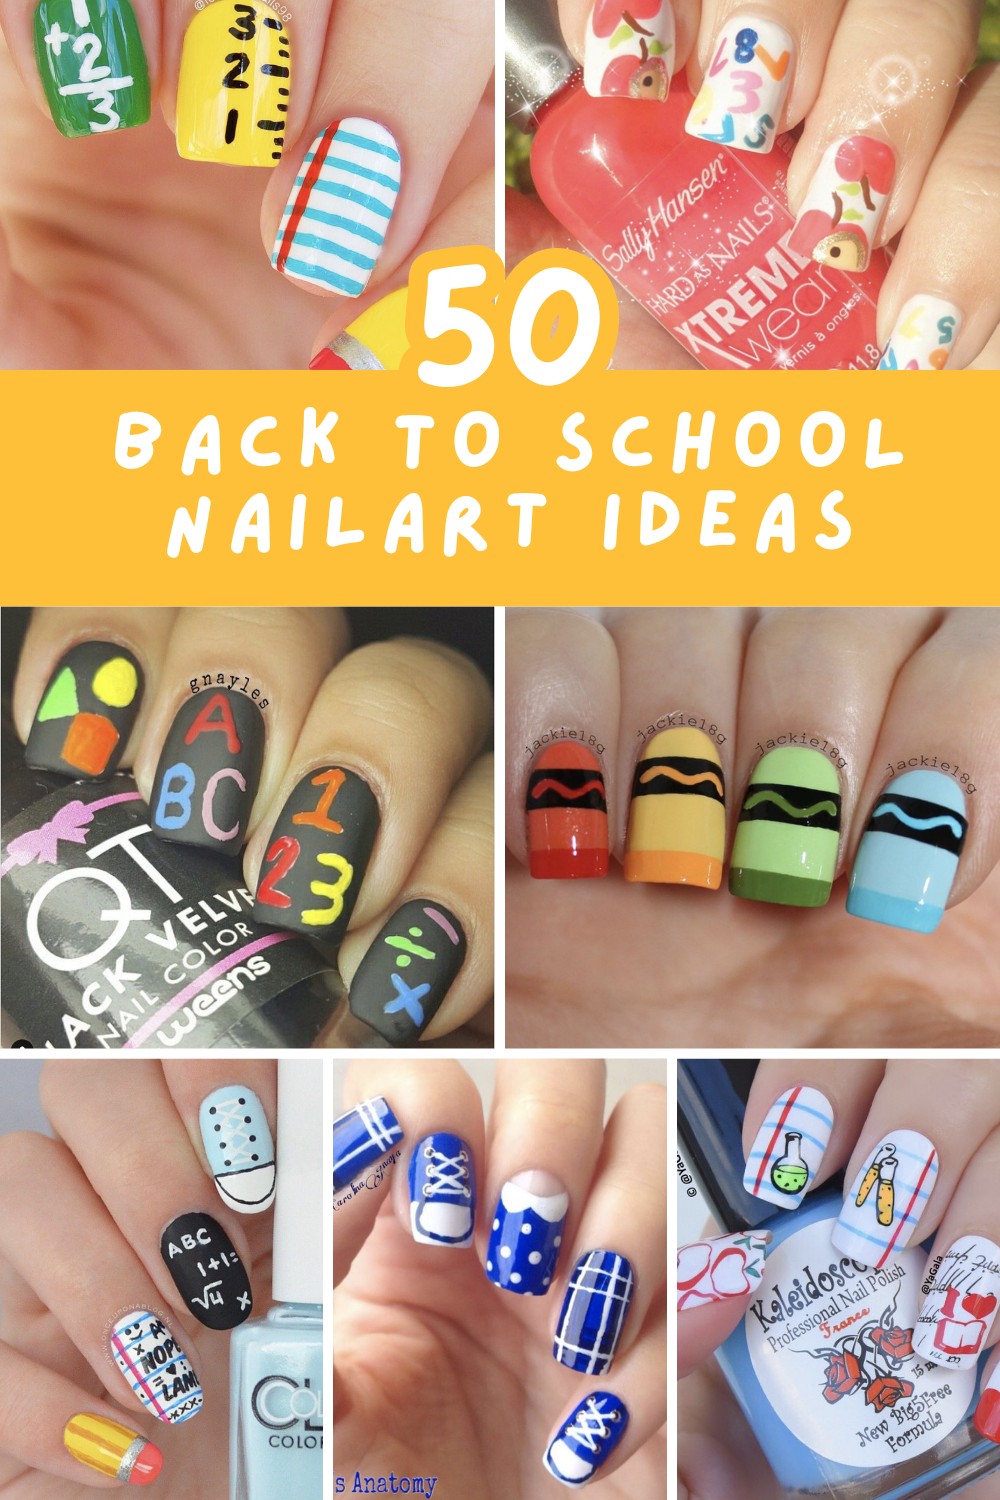 Get ready for school with these adorable nail designs! Perfect for teachers and students, these ideas will make you stand out in class. 📚💅 #BackToSchoolNails #NailArt